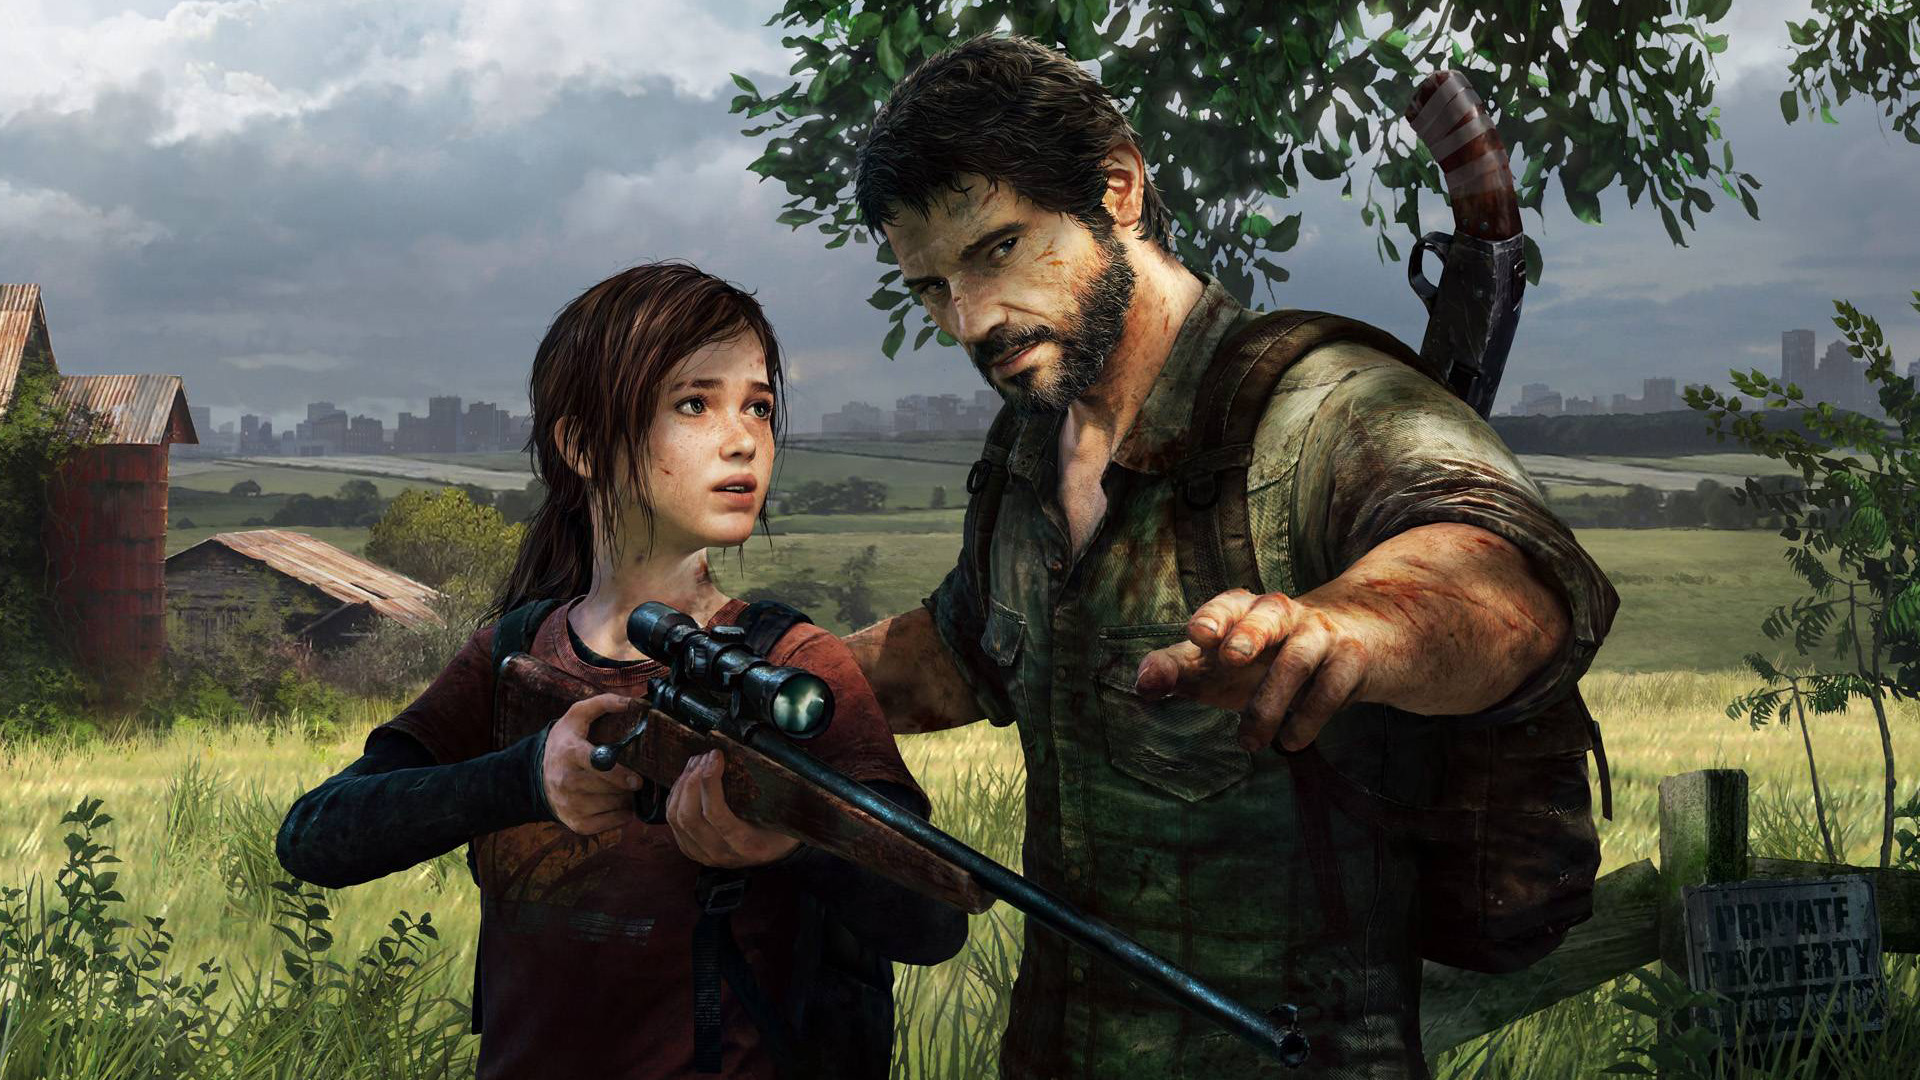 The Last of Us TV show “should” debut in early 2023, director says